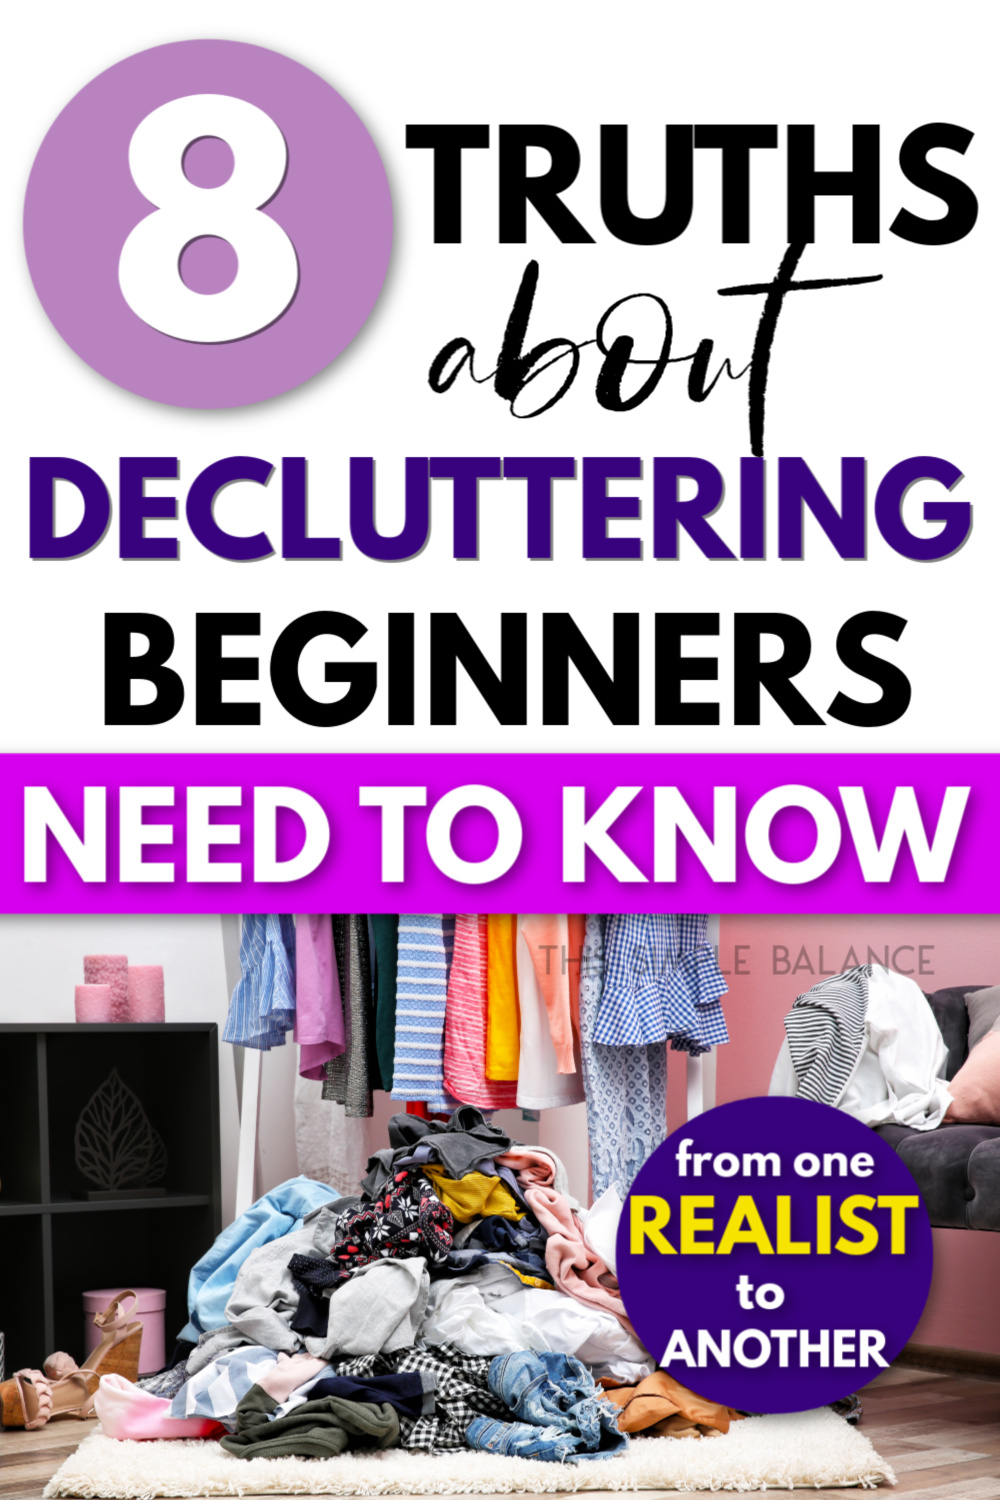 partially decluttered room with clothes on a rack and a pile on the floor, with text overlay, "8 truths about decluttering beginners need to know from one realist to another"